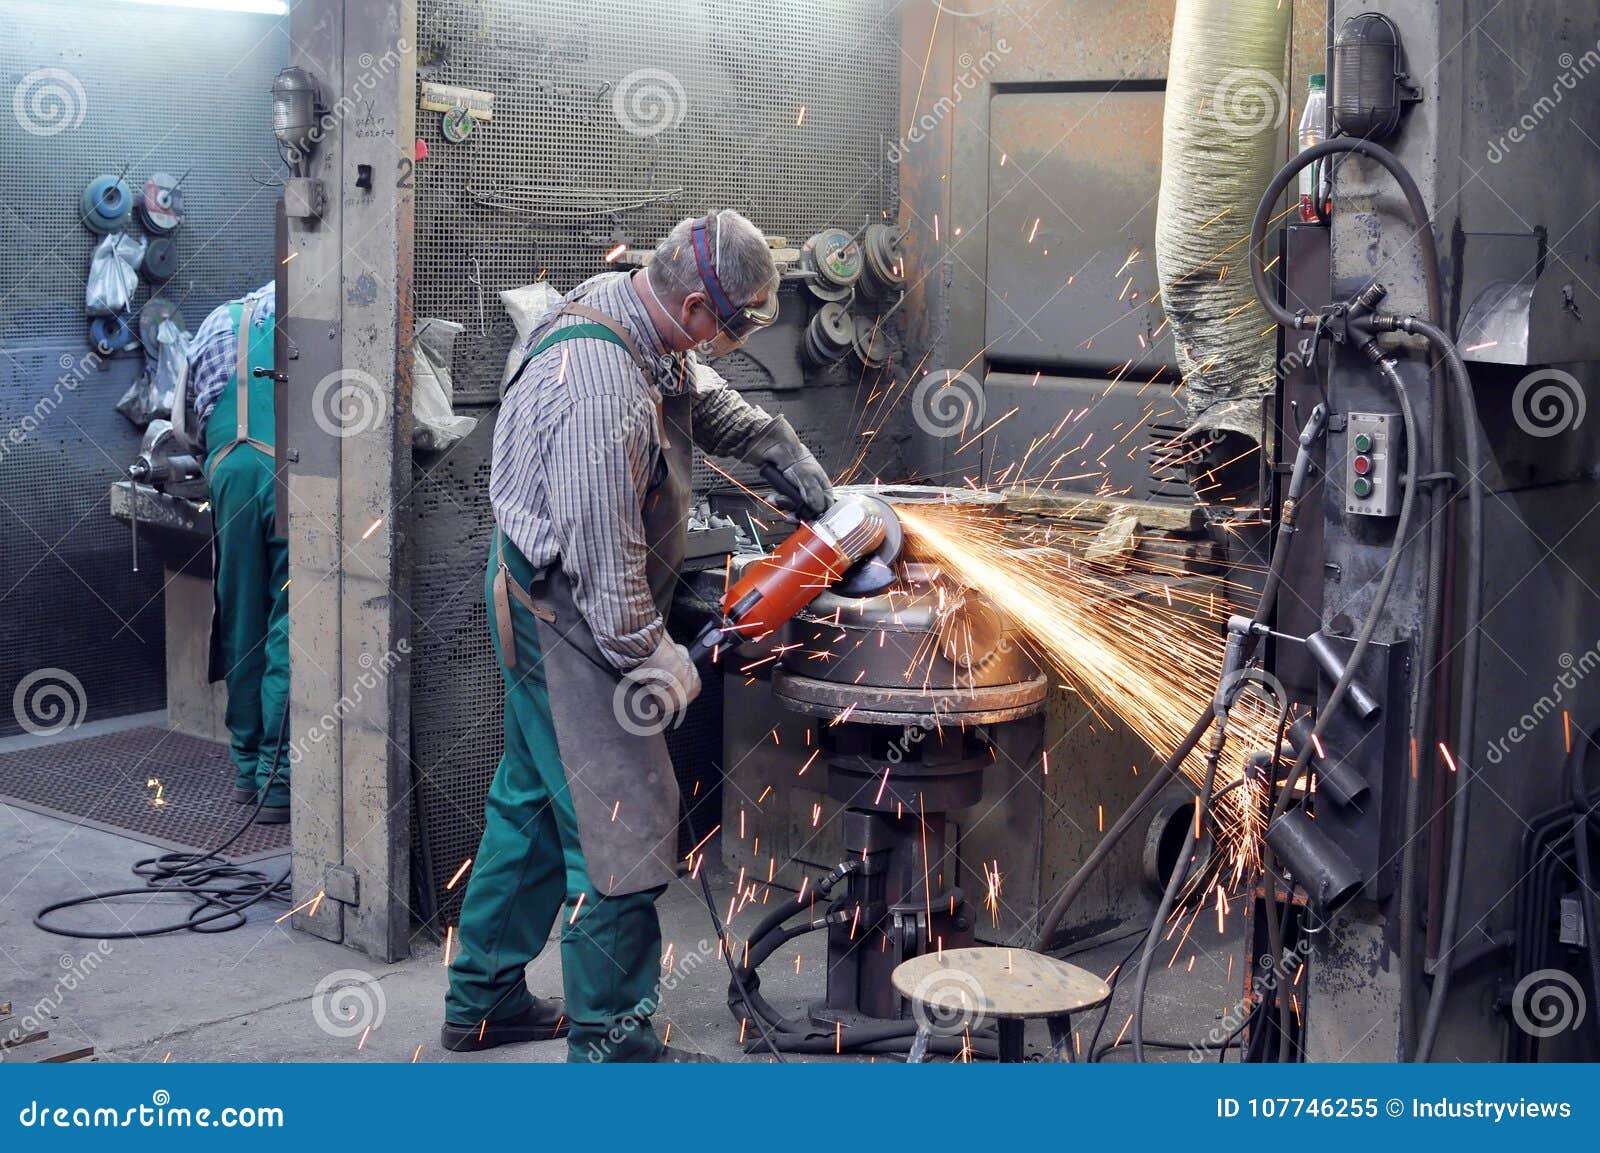 workers in a foundry grind castings with a grinding machine - he